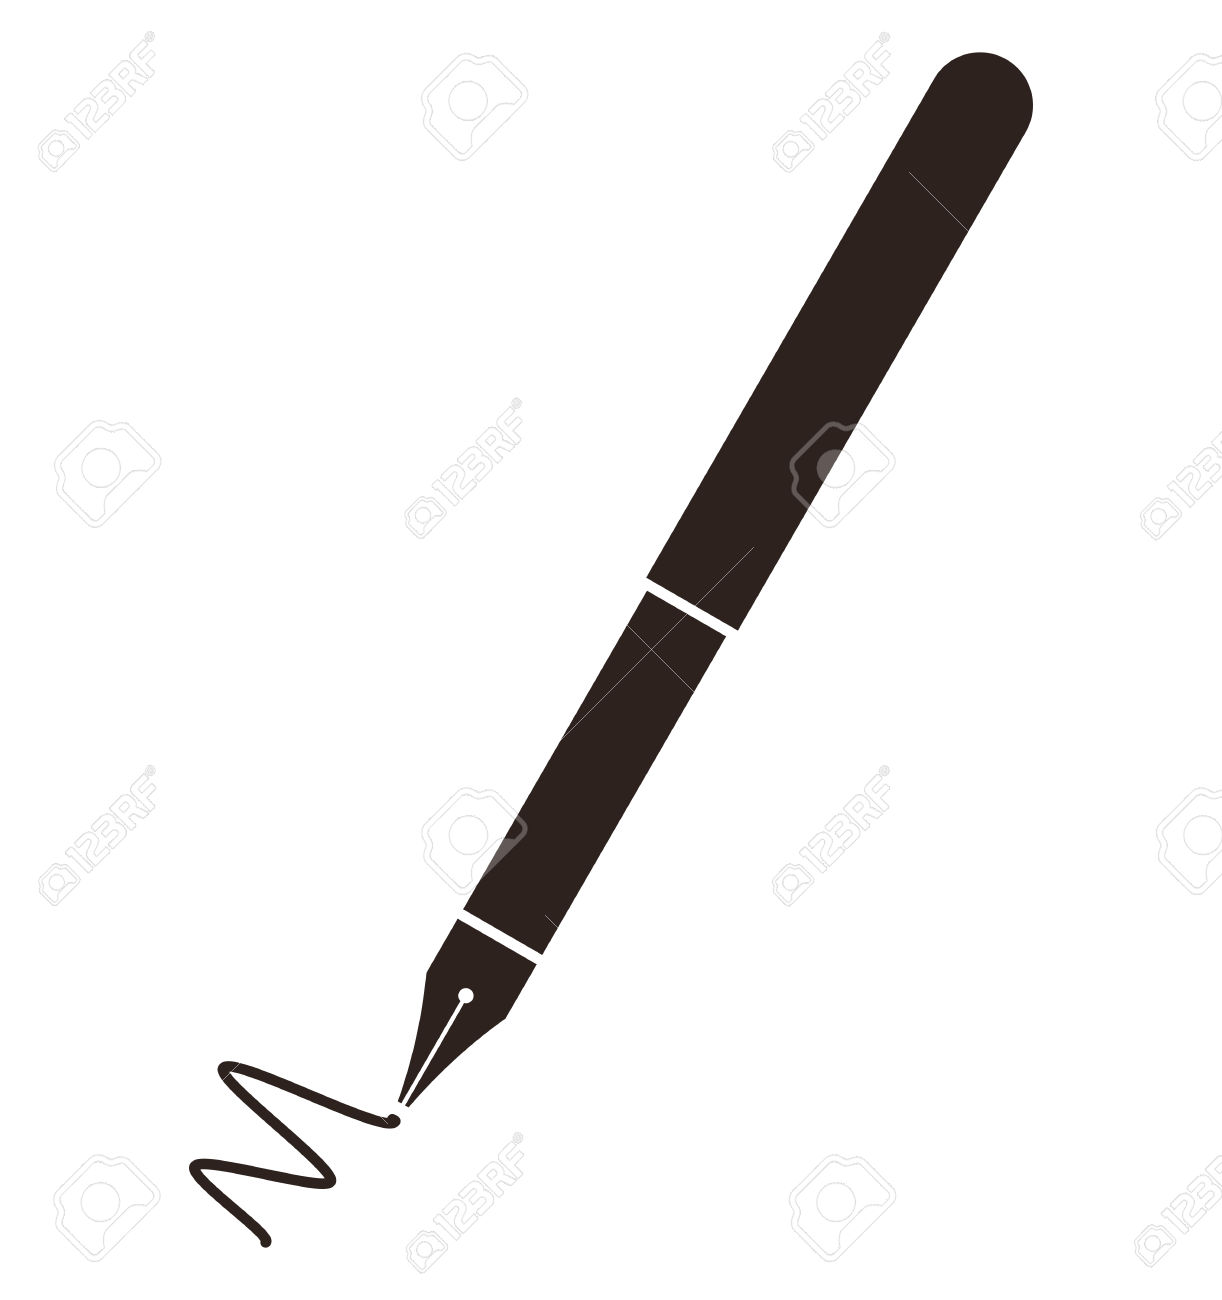 Feather pen clipart free .